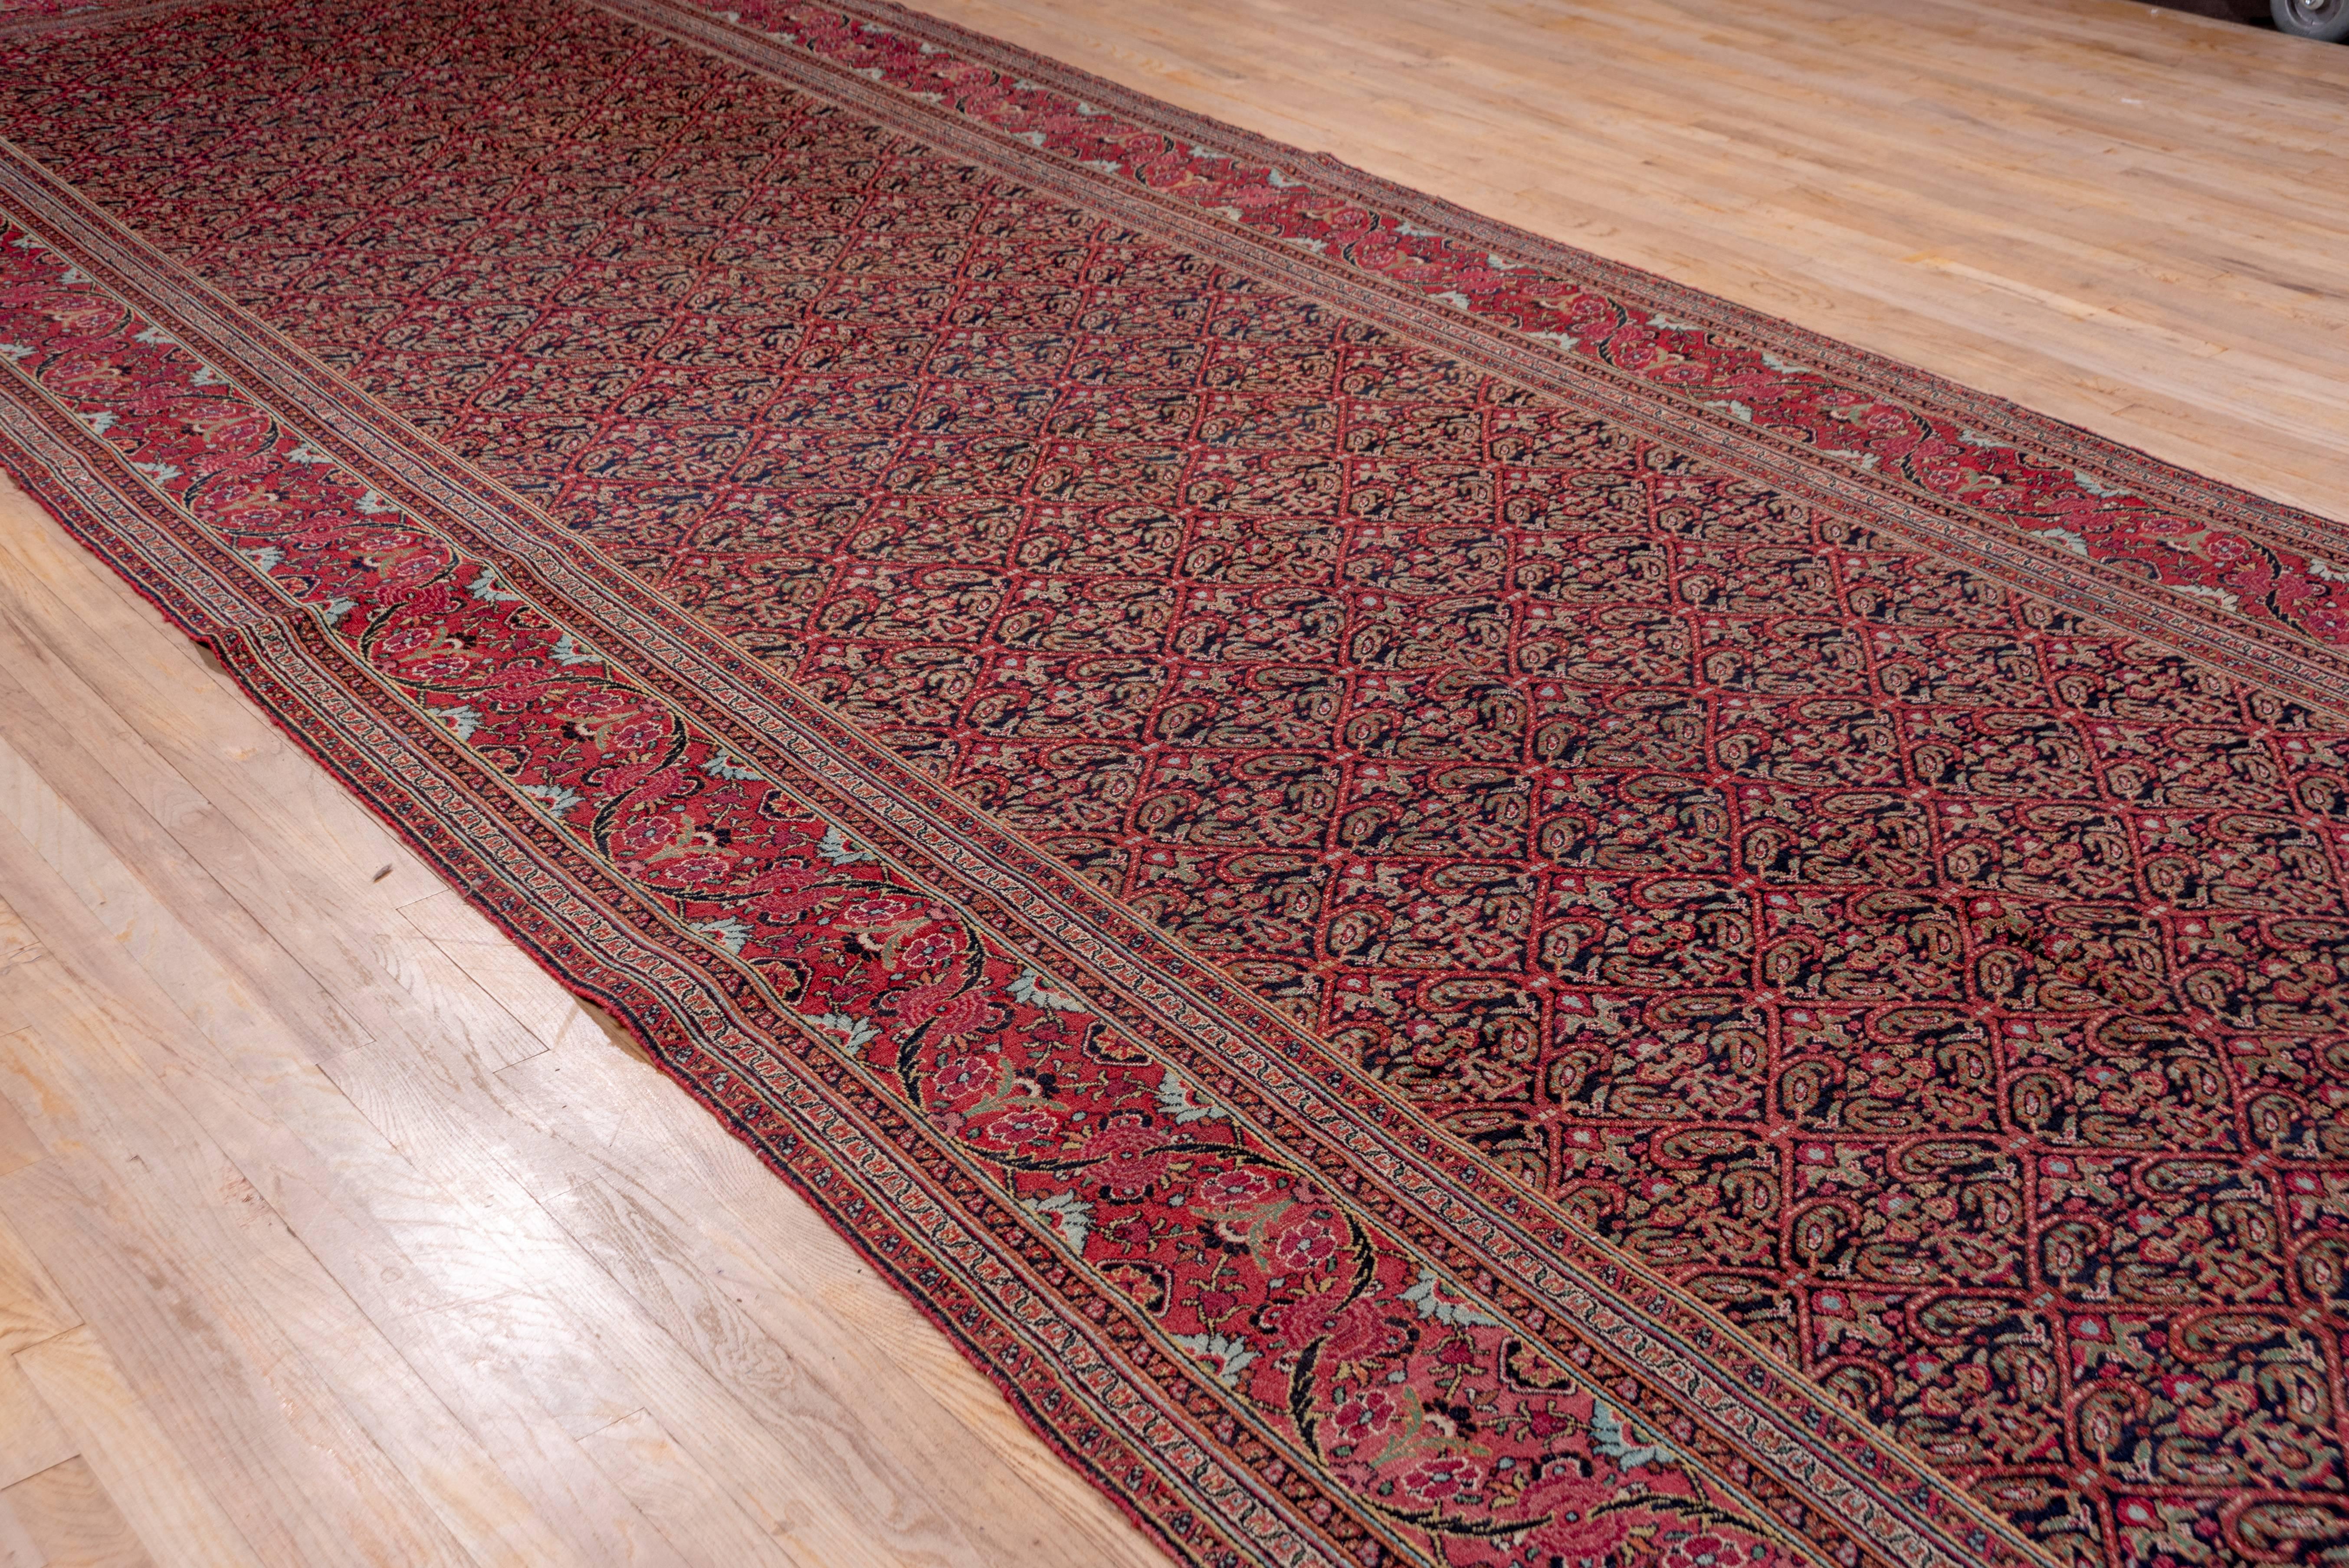 Persian Antique Khorassan Carpet, Red Field For Sale 3